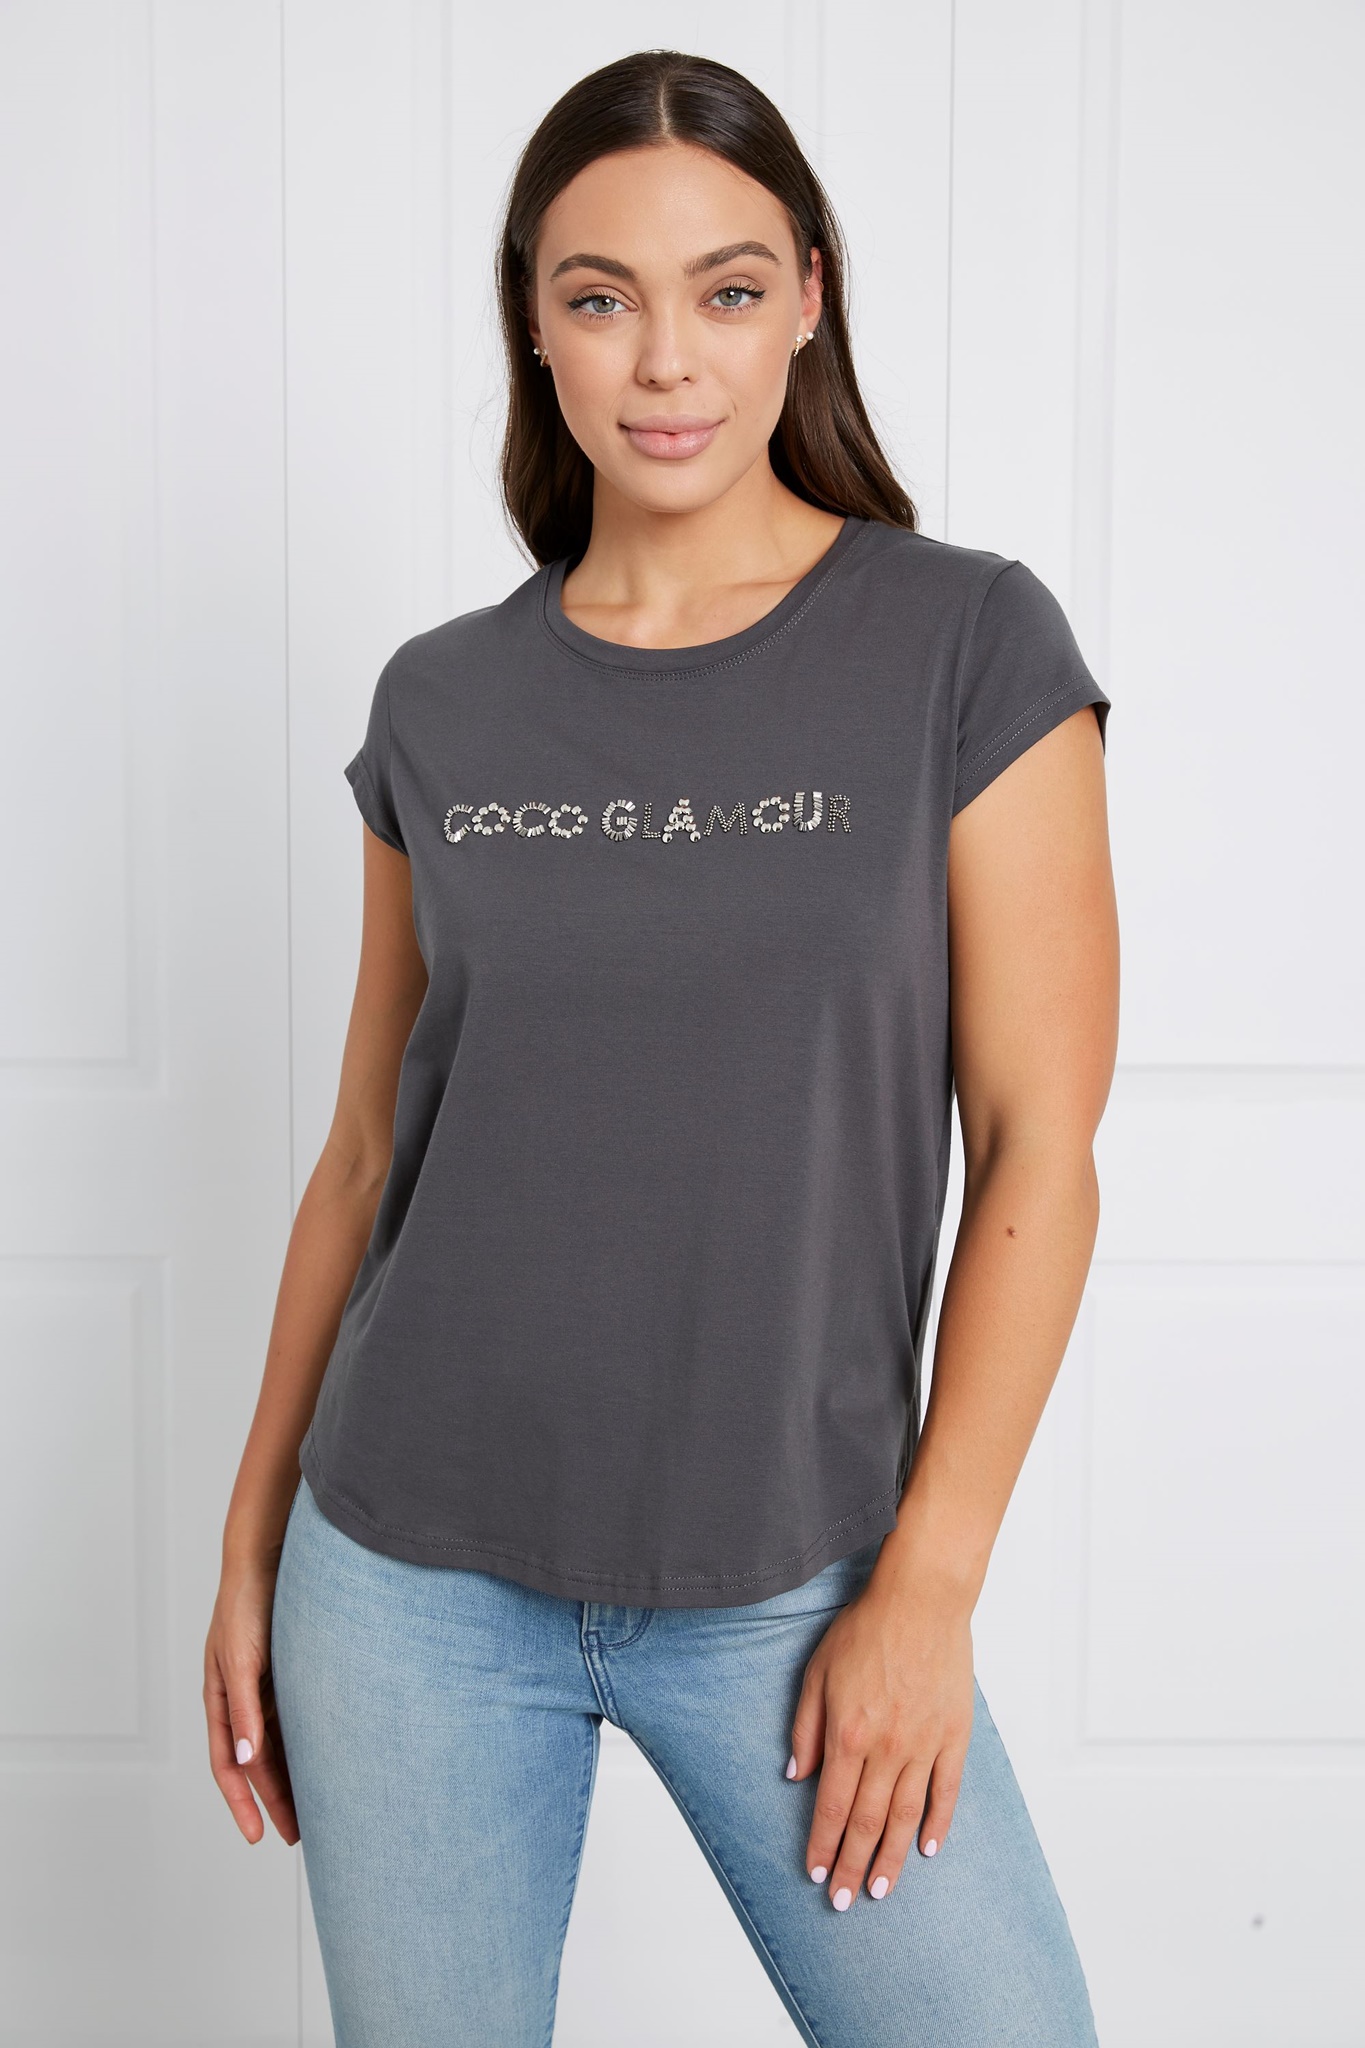 COCO GLAMOUR EMBELLISHED TEE